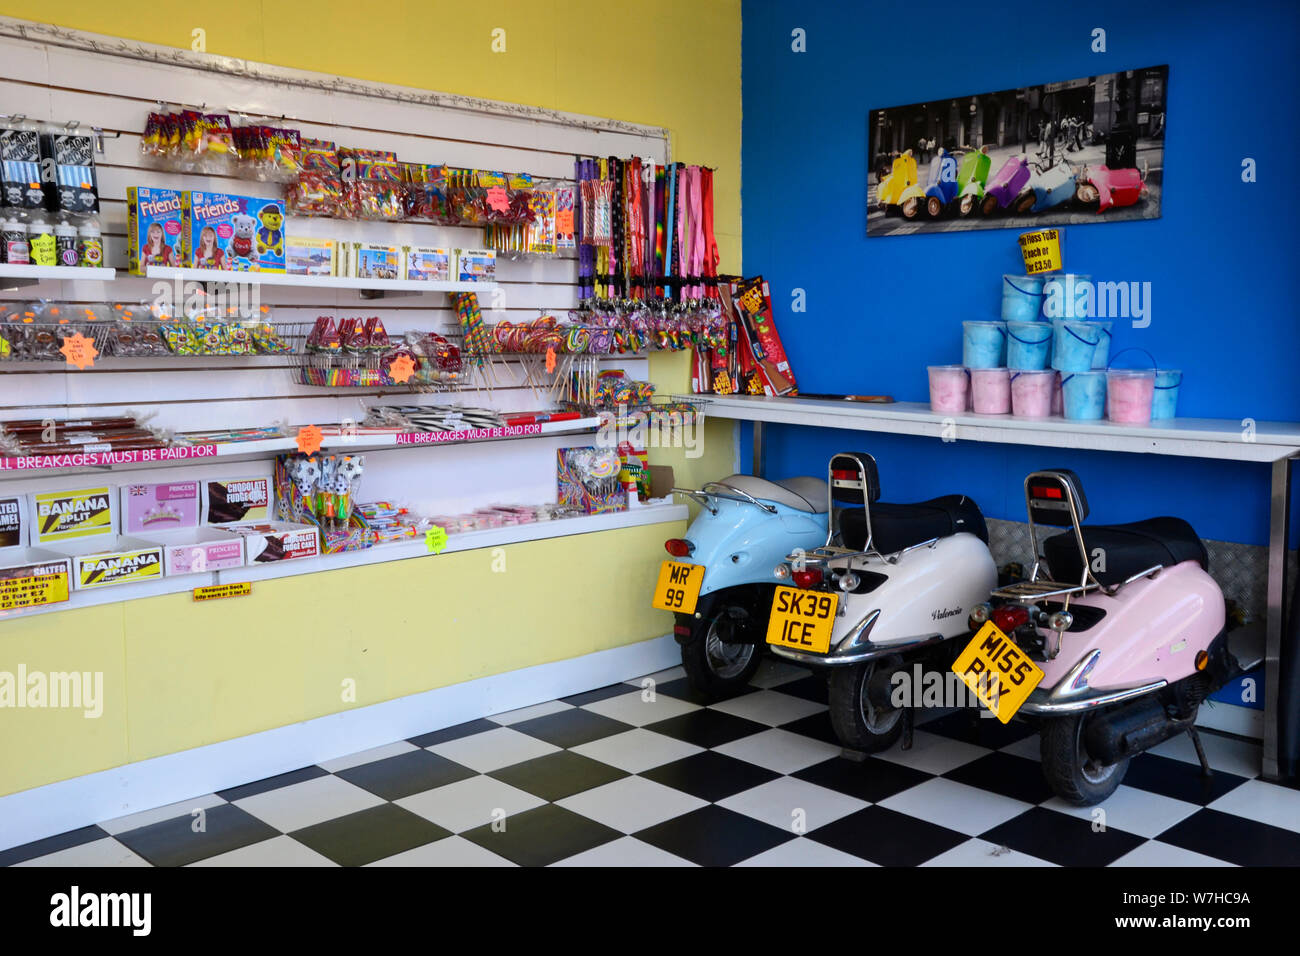 Sweet shop with a 1960s scootering theme at the Pleasure Beach fairground, Skegness, Lincolnshire, UK Stock Photo